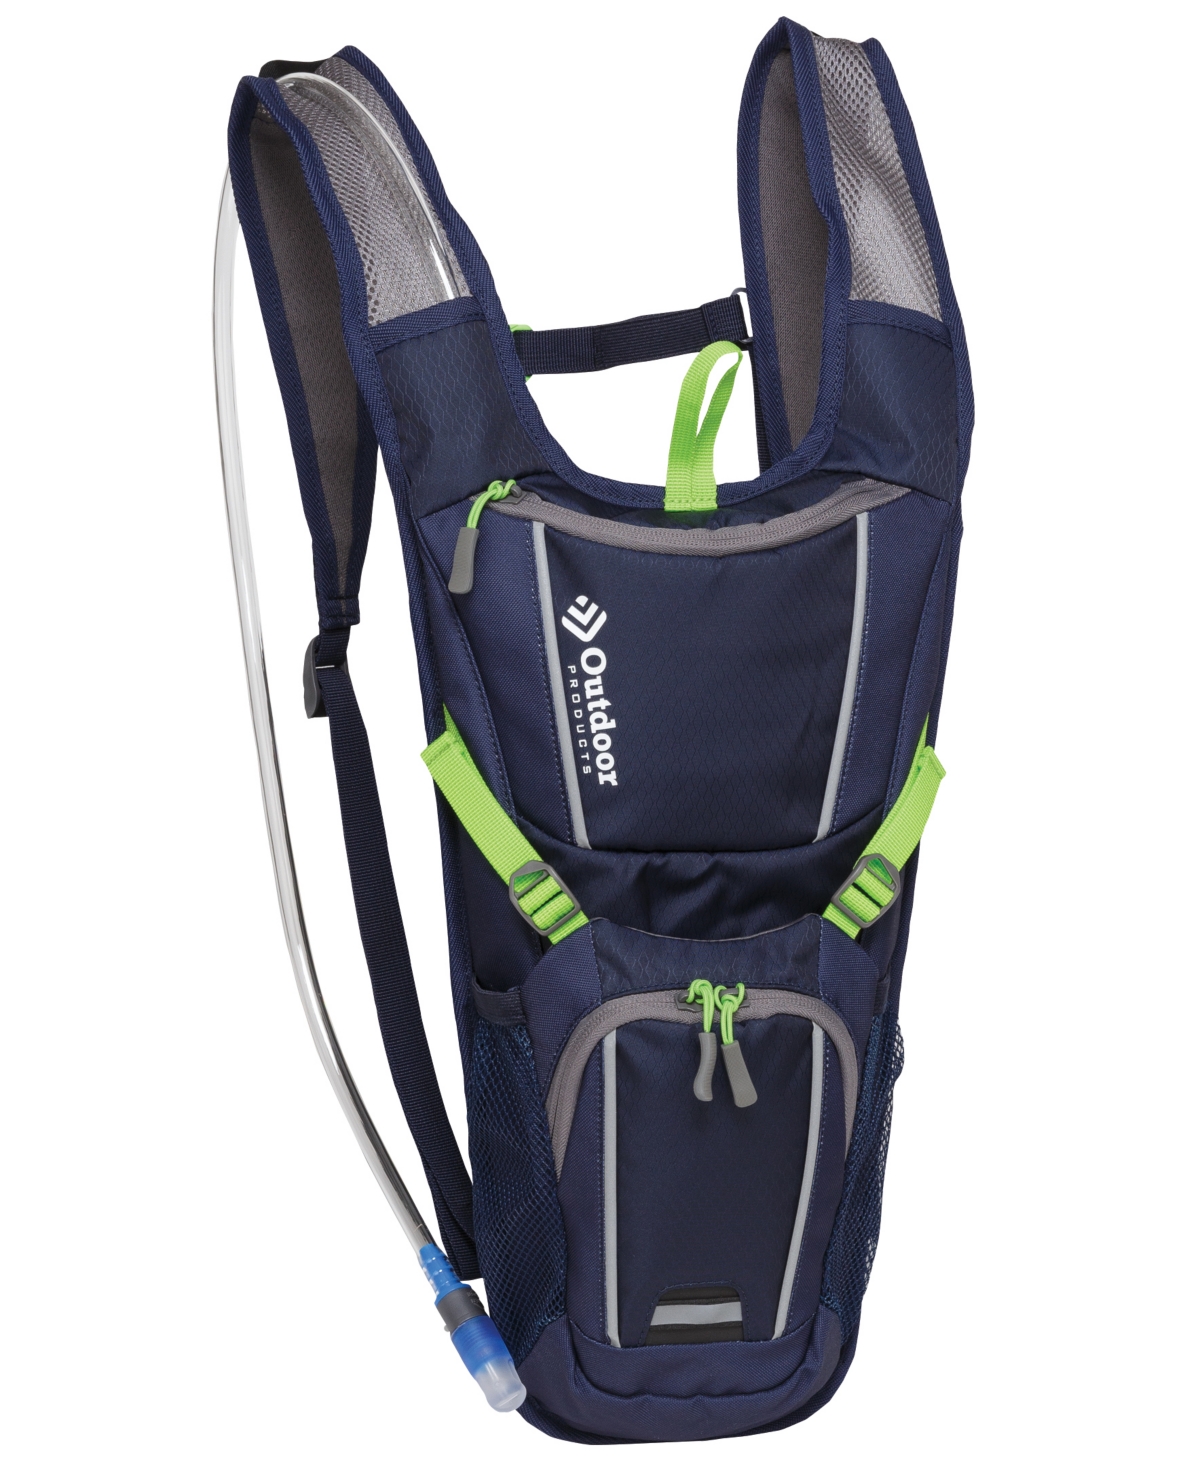 Heights H2O Hydration Backpack - Blue